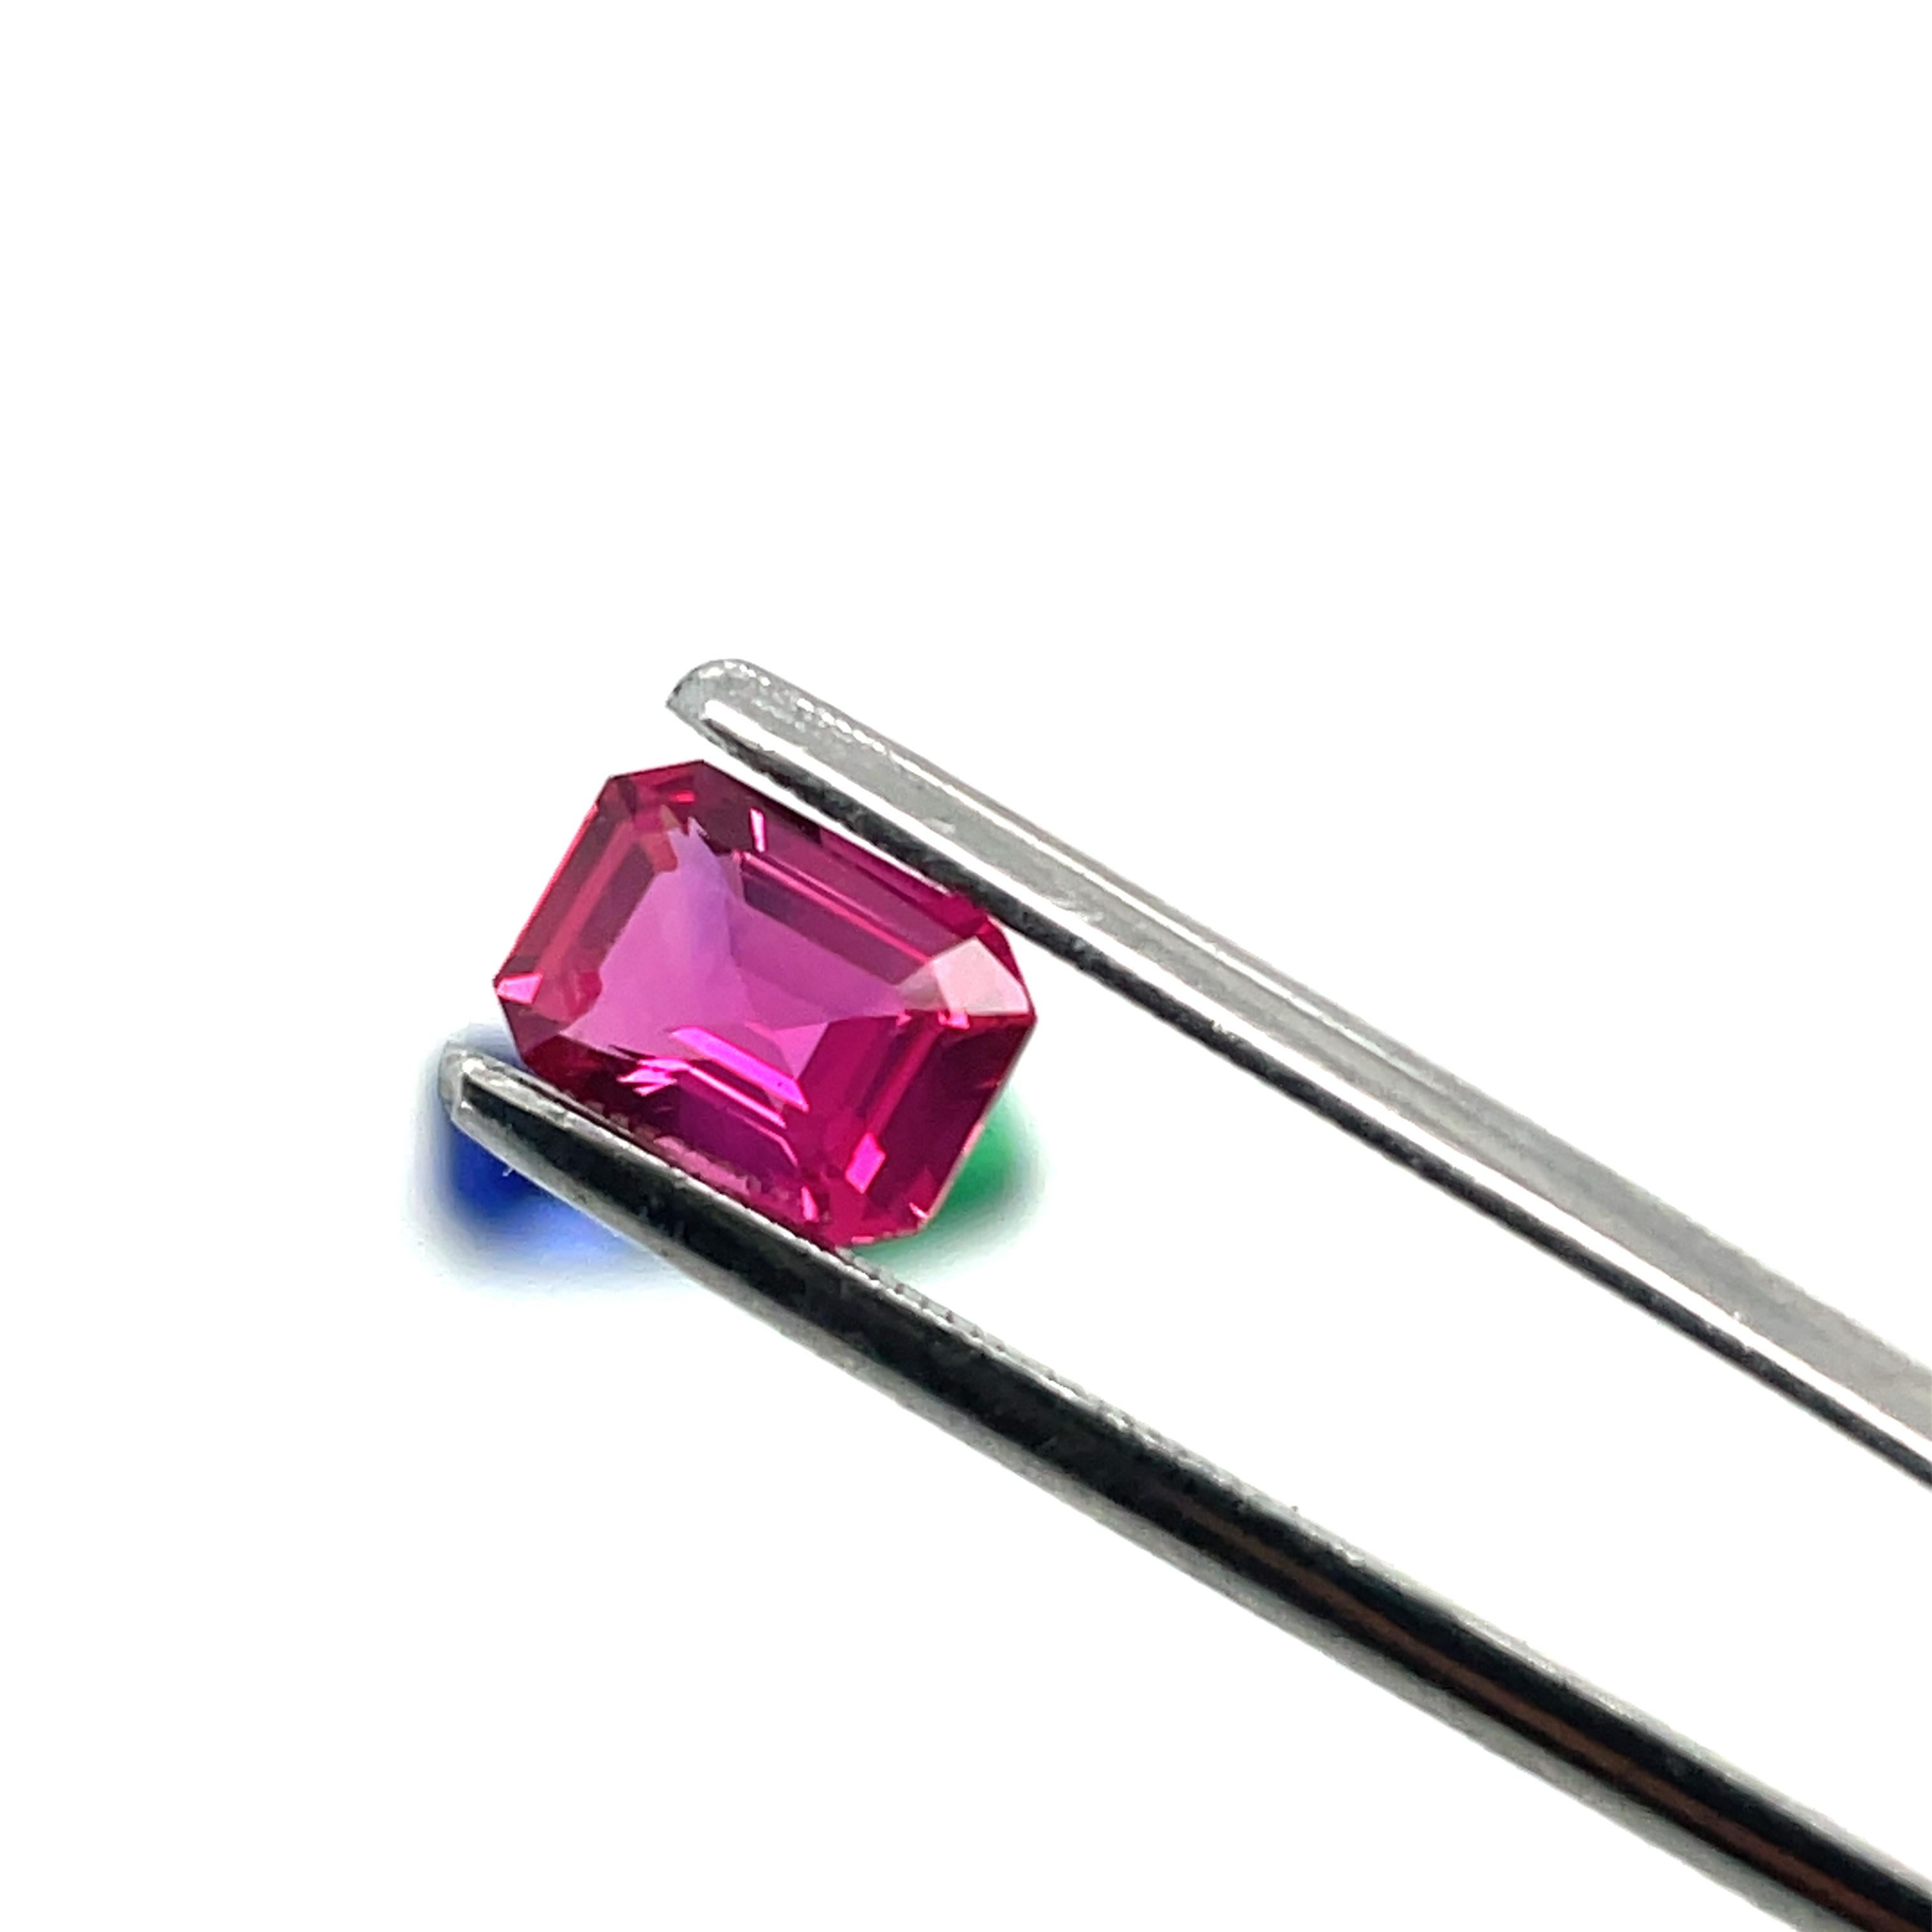 Emerald-Cut Ruby Cts 1.31 and Blue Sapphire Cts 2.16 and Emerald Cts 0.92 Loose  For Sale 1